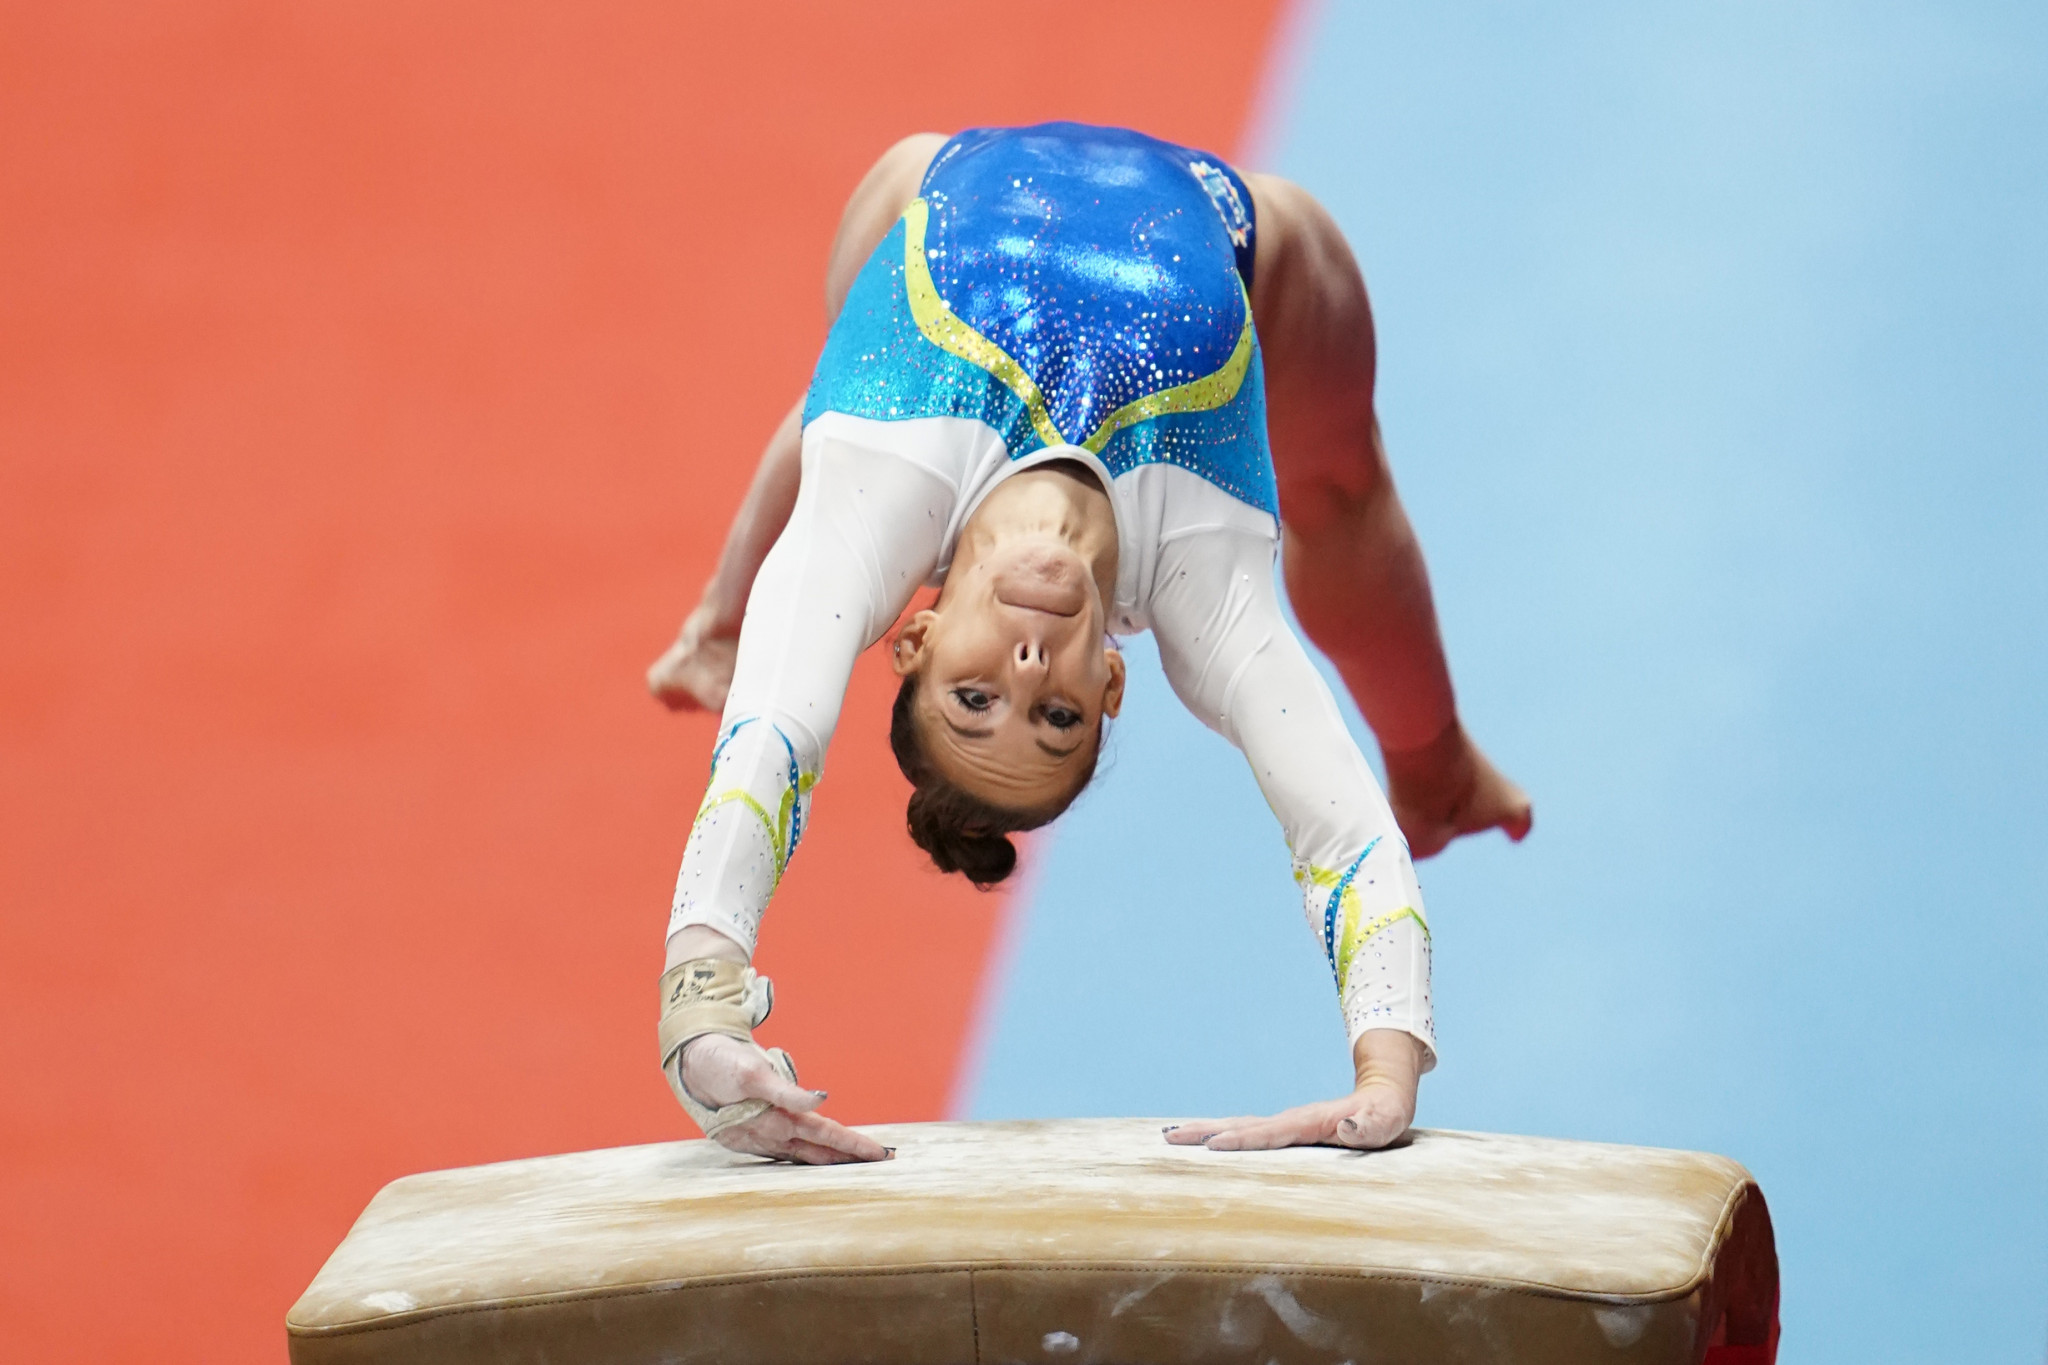 Slovenia's Tjaša Kysselef placed fifth in women's vault qualifying at the FIG World Cup in Baku ©Getty Images